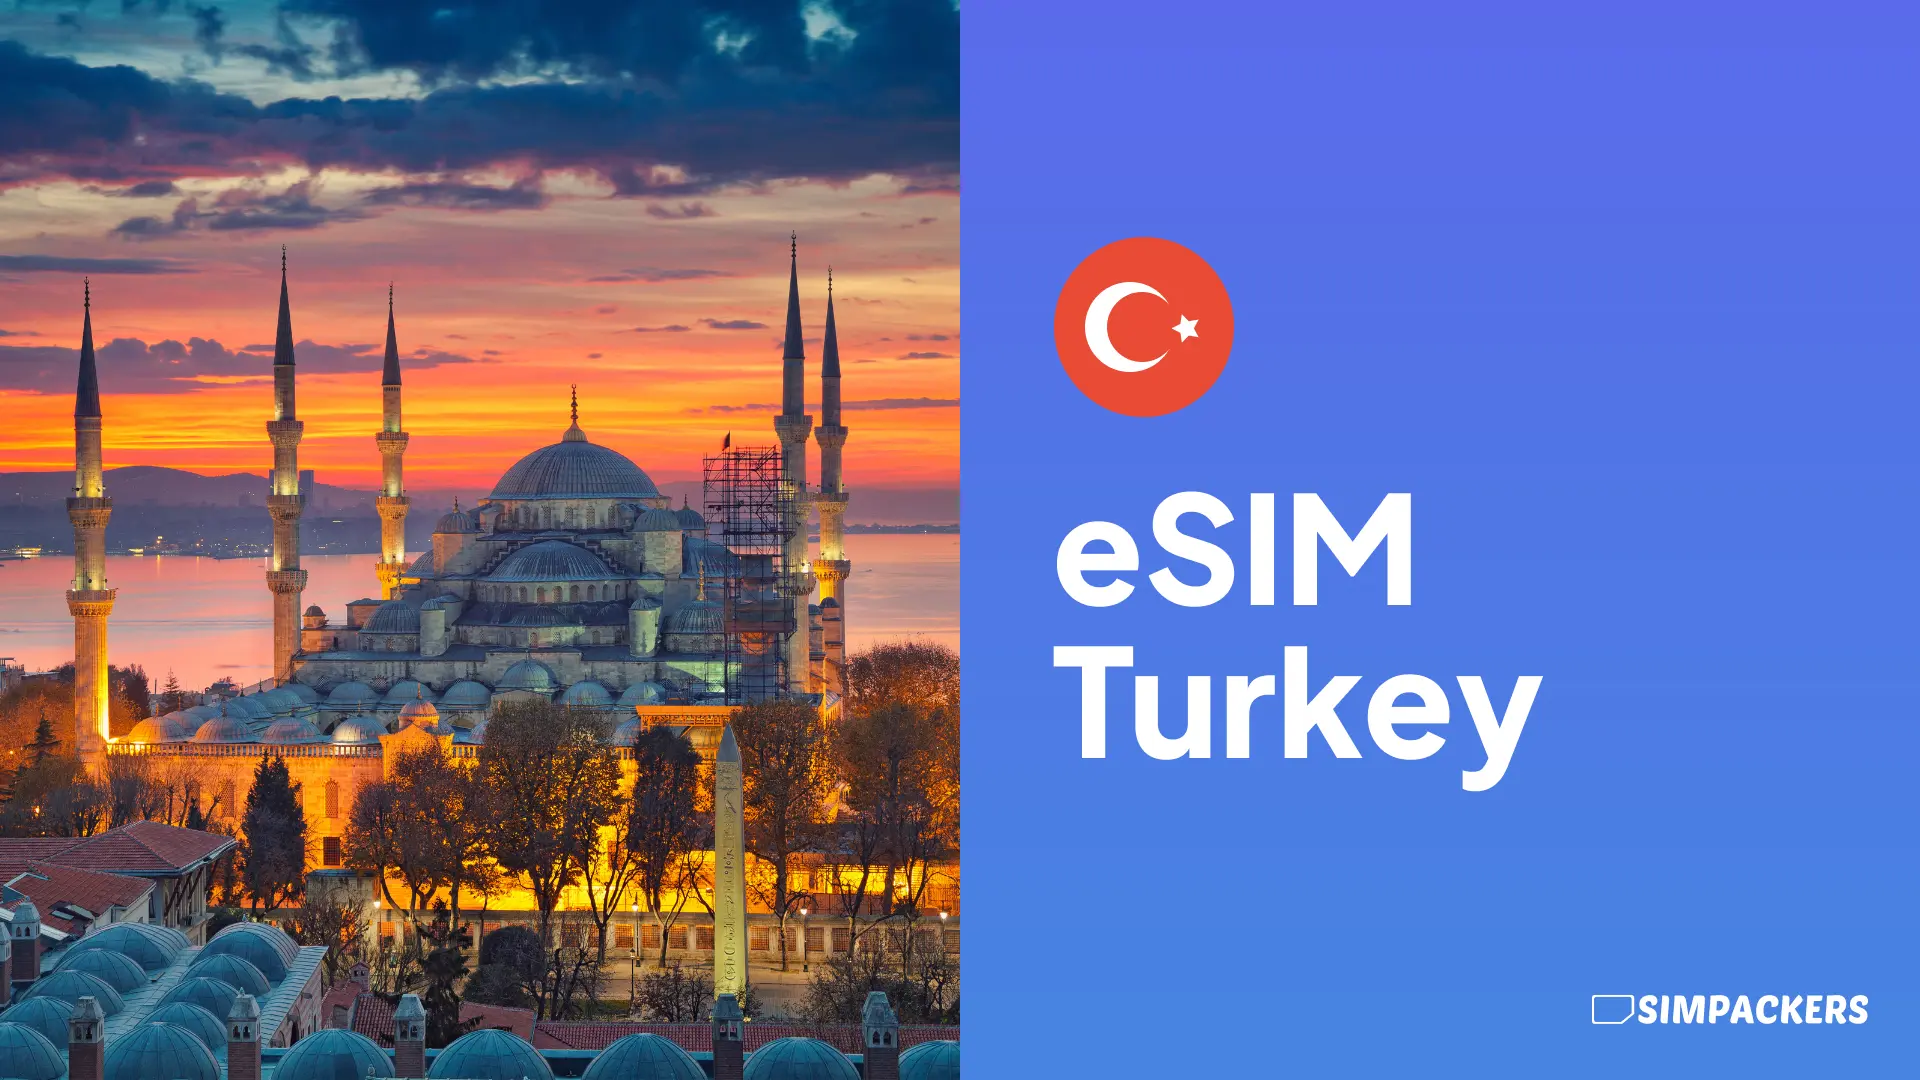 Esim Turkey Providers: Comparing Plans and Services